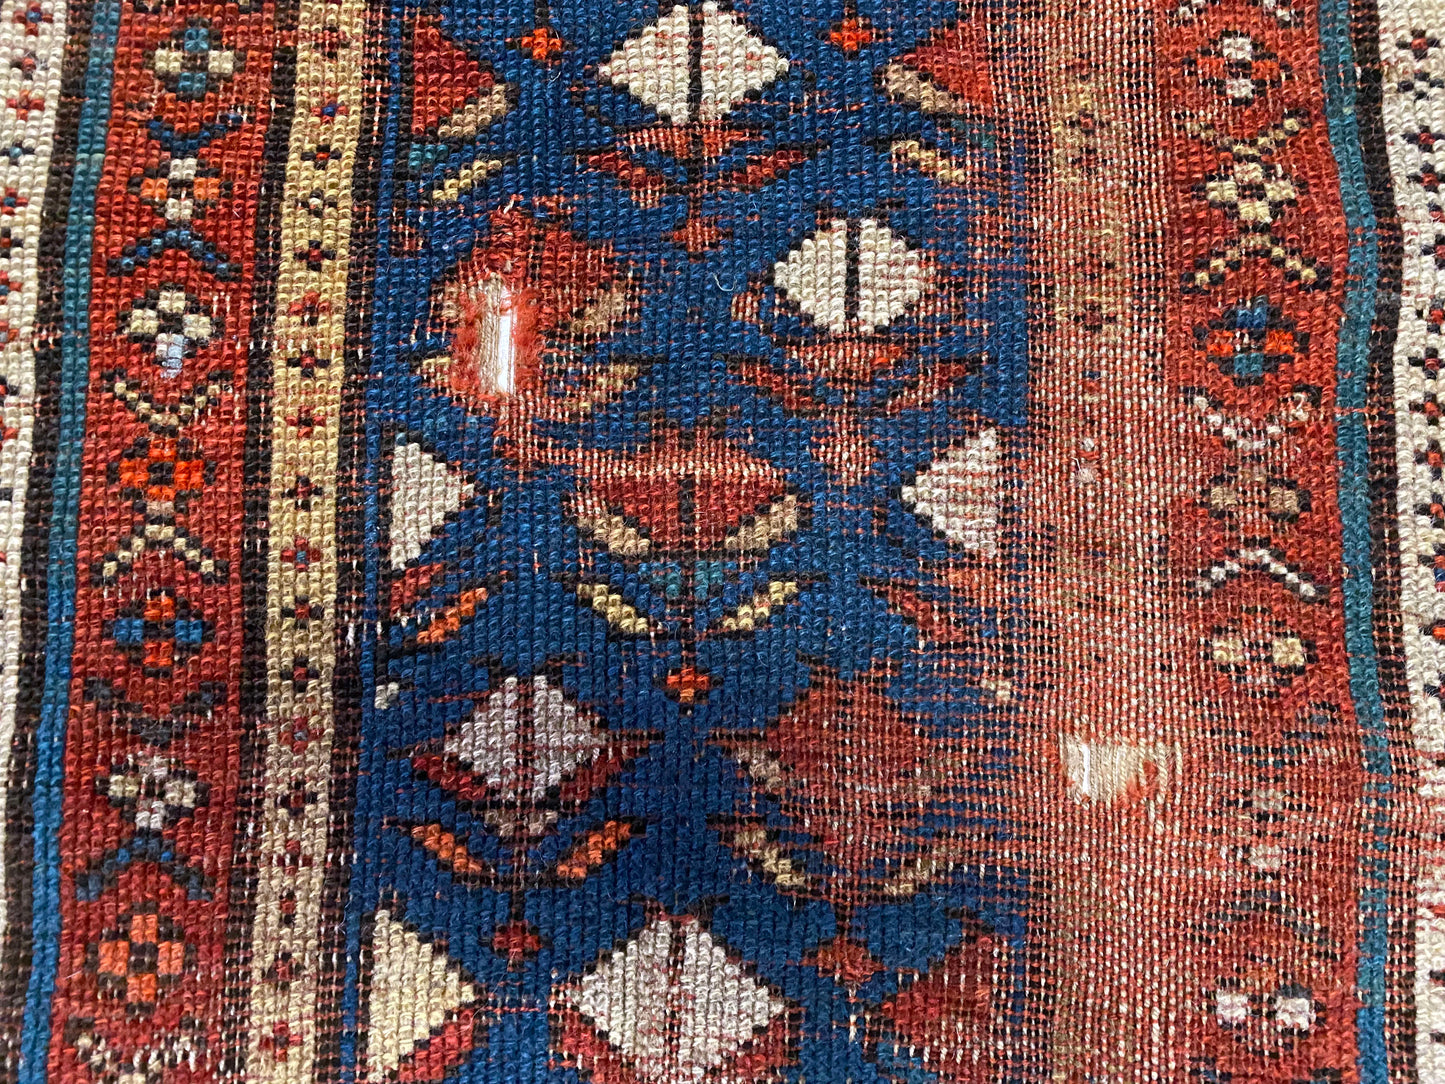 Intricately hand woven Kazak Persian rug with red, blue, orange, tan and white patterns hand woven across - Available from King Kennedy Rugs Los Angeles